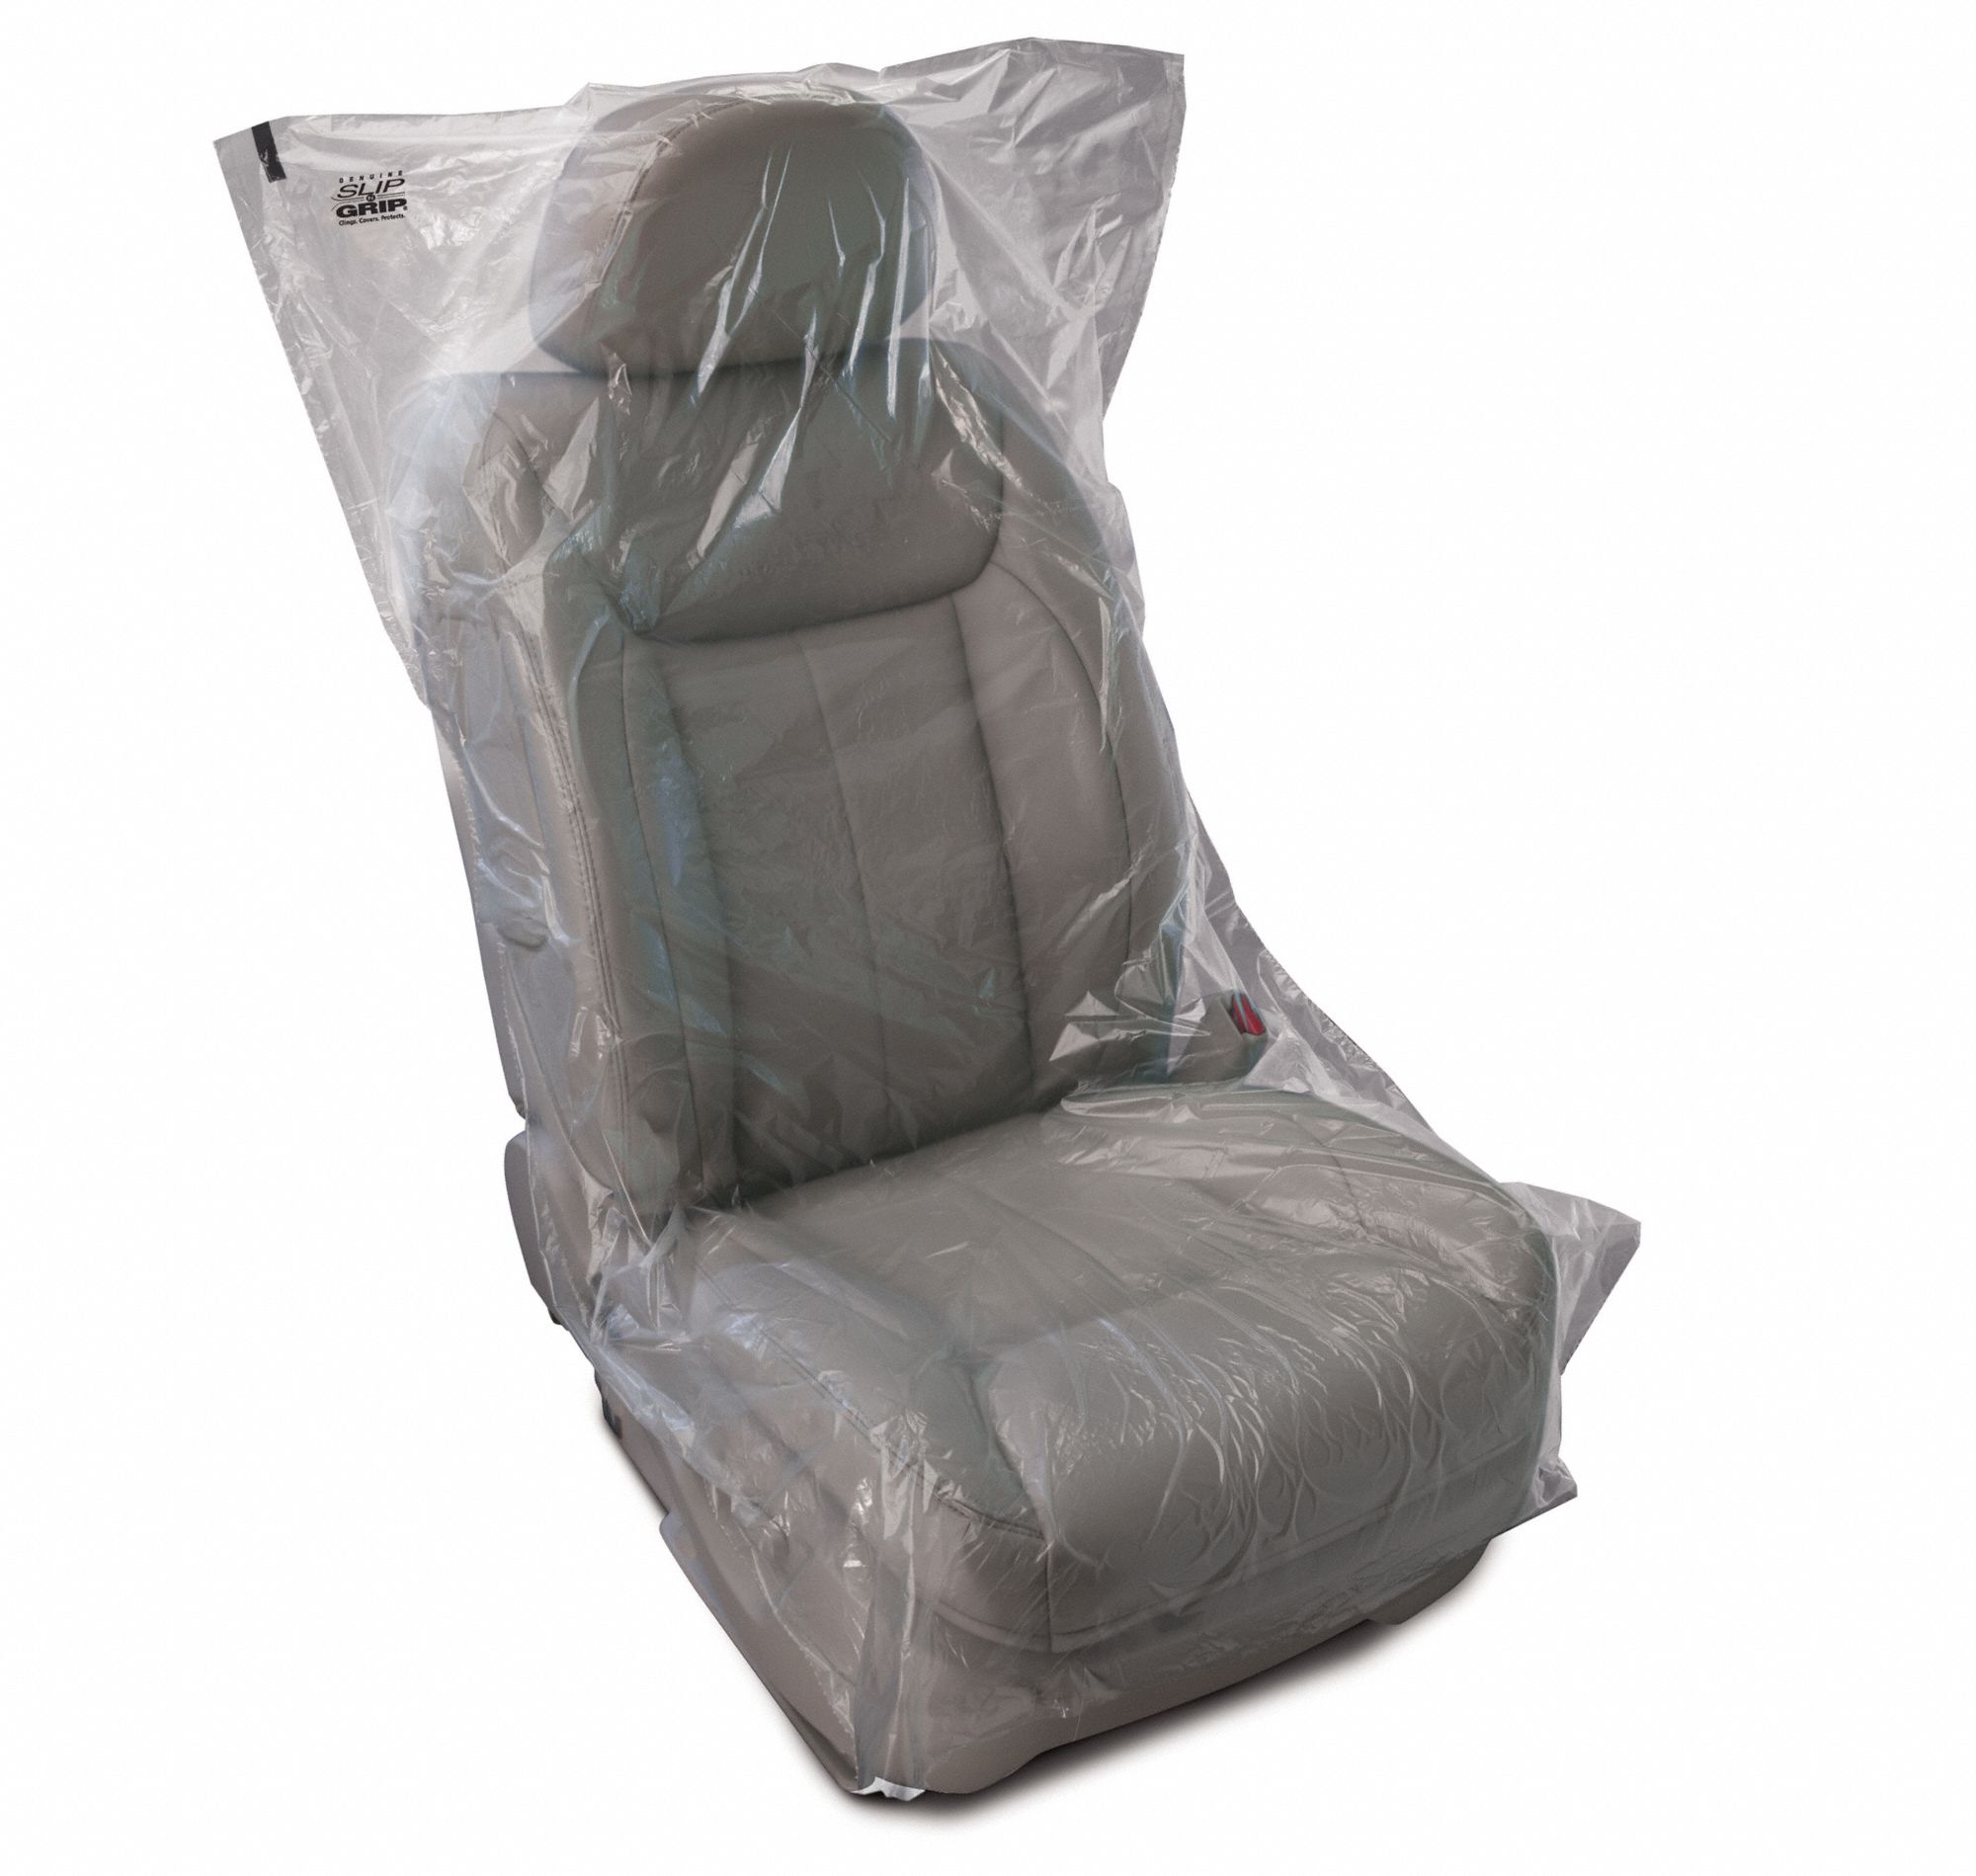 Slip N Grip Disposable Seat Covers Double Pack .7 Mil Plastic 2 Rolls of 250  P0